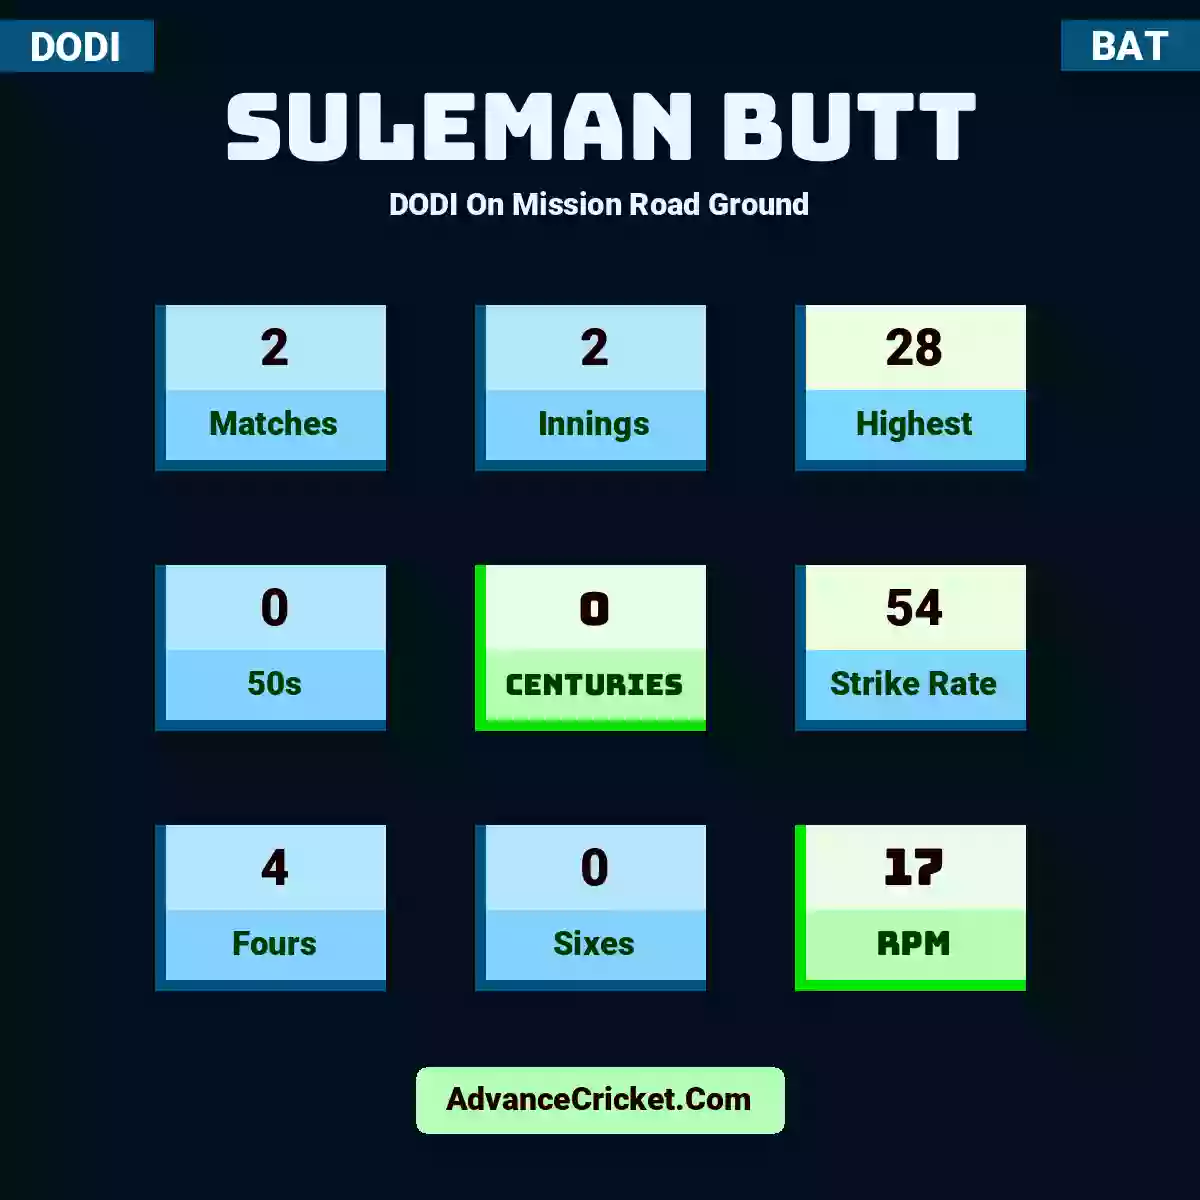 Suleman Butt DODI  On Mission Road Ground, Suleman Butt played 2 matches, scored 28 runs as highest, 0 half-centuries, and 0 centuries, with a strike rate of 54. S.Butt hit 4 fours and 0 sixes, with an RPM of 17.